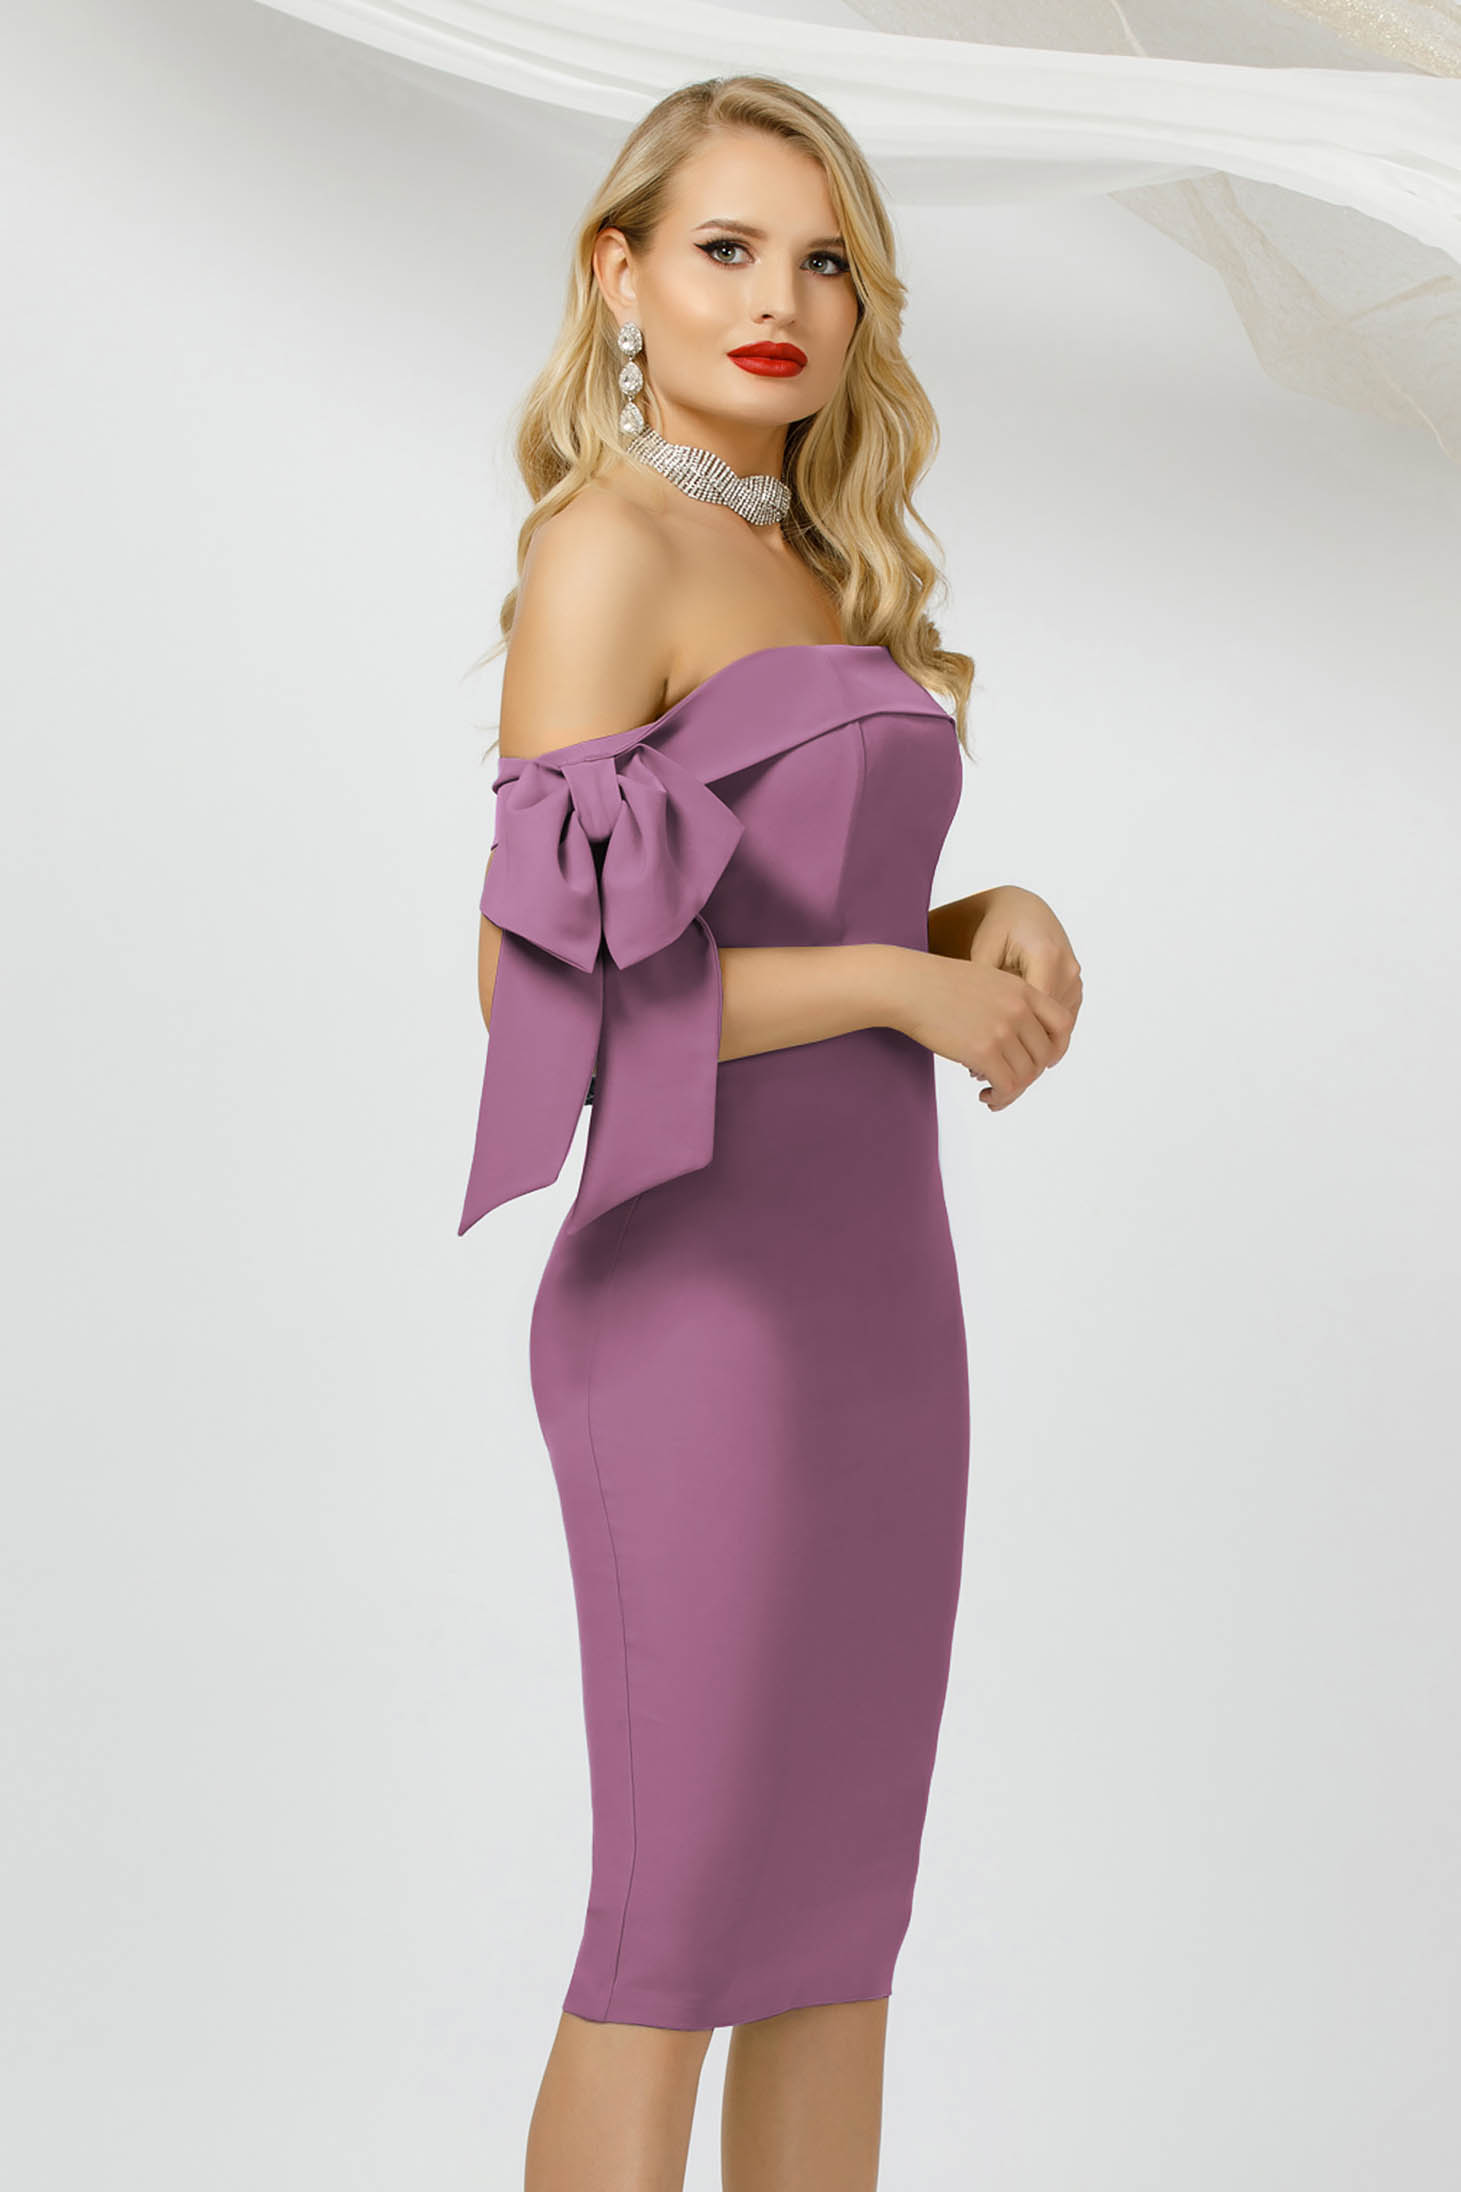 Purple Pencil Dress made of thin material accessorized with bows - PrettyGirl 4 - StarShinerS.com